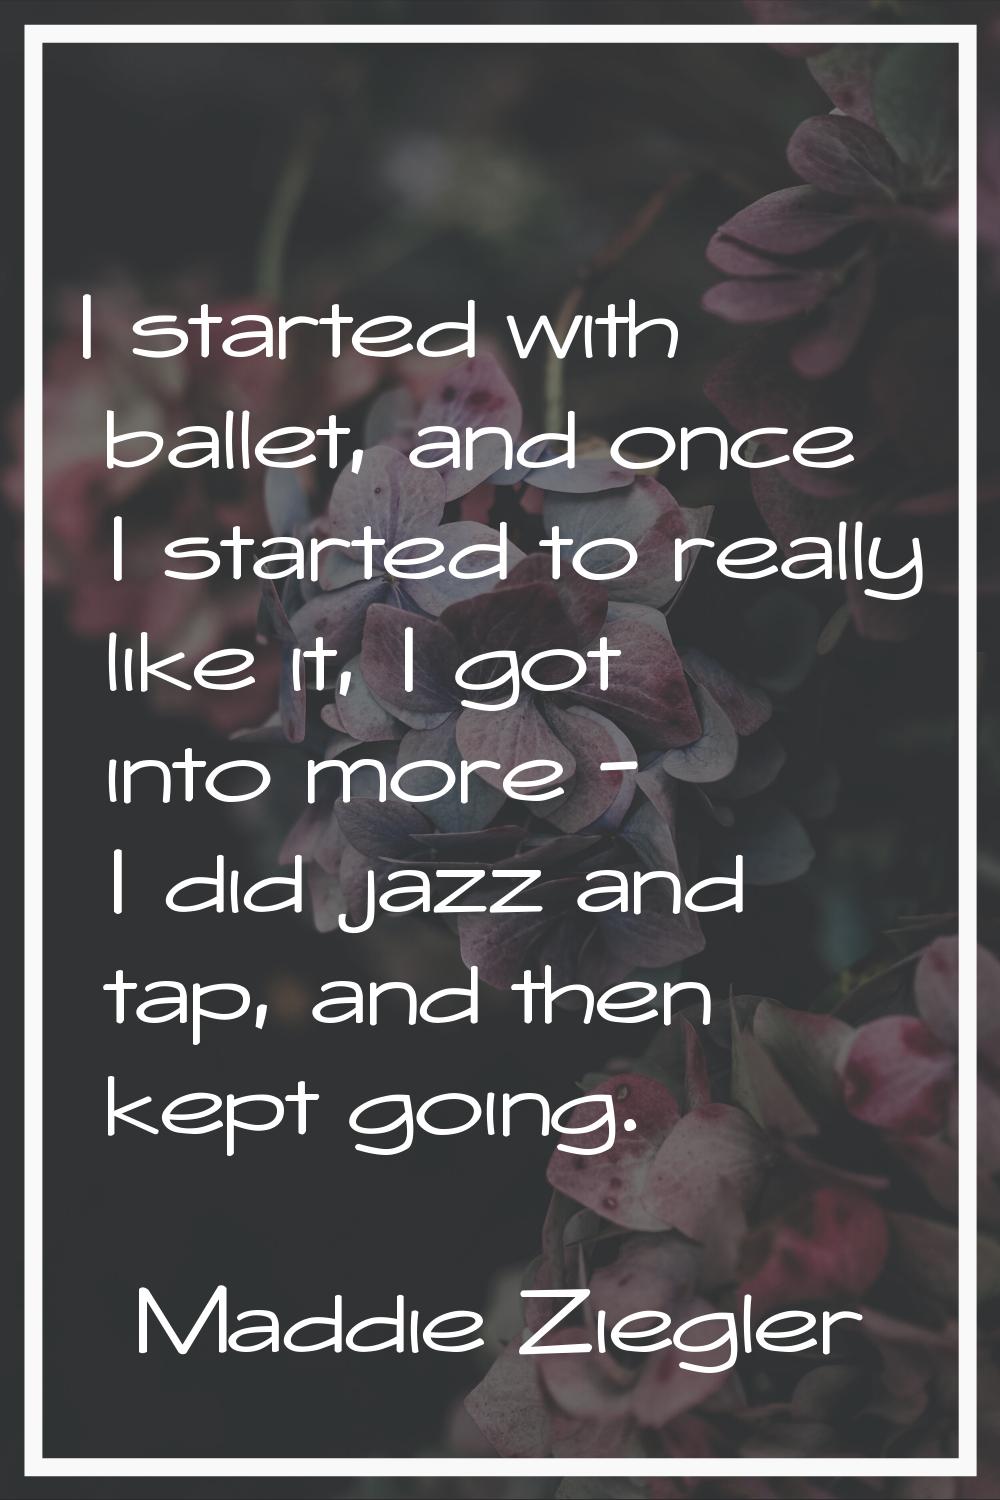 I started with ballet, and once I started to really like it, I got into more - I did jazz and tap, 